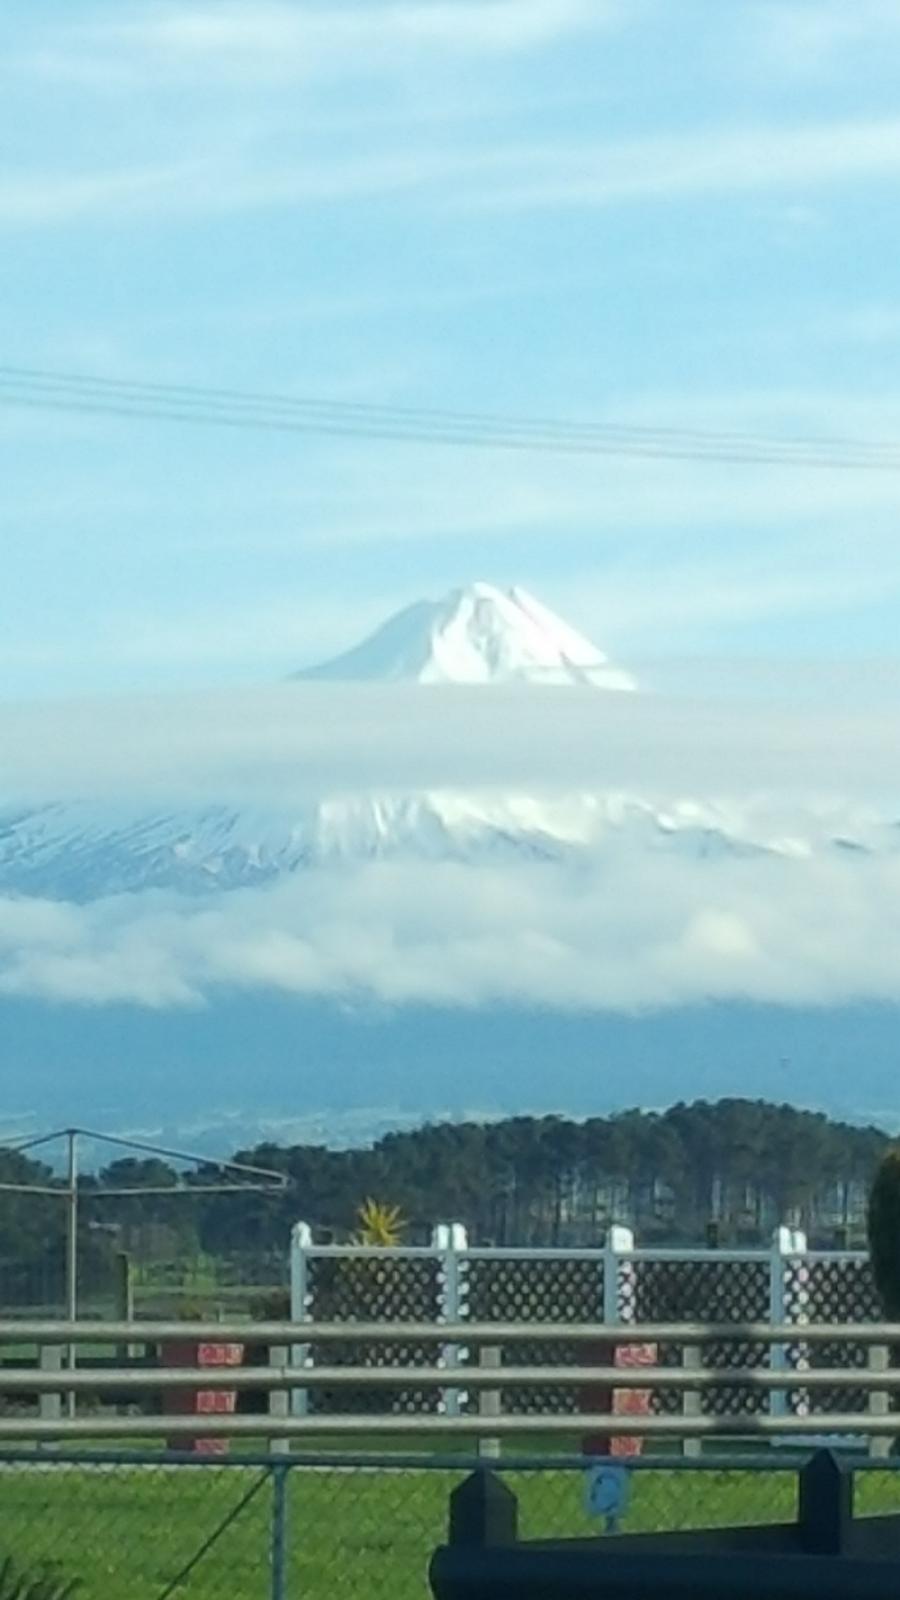 The Mountain Watches Over Taranaki - click  image to enlarge